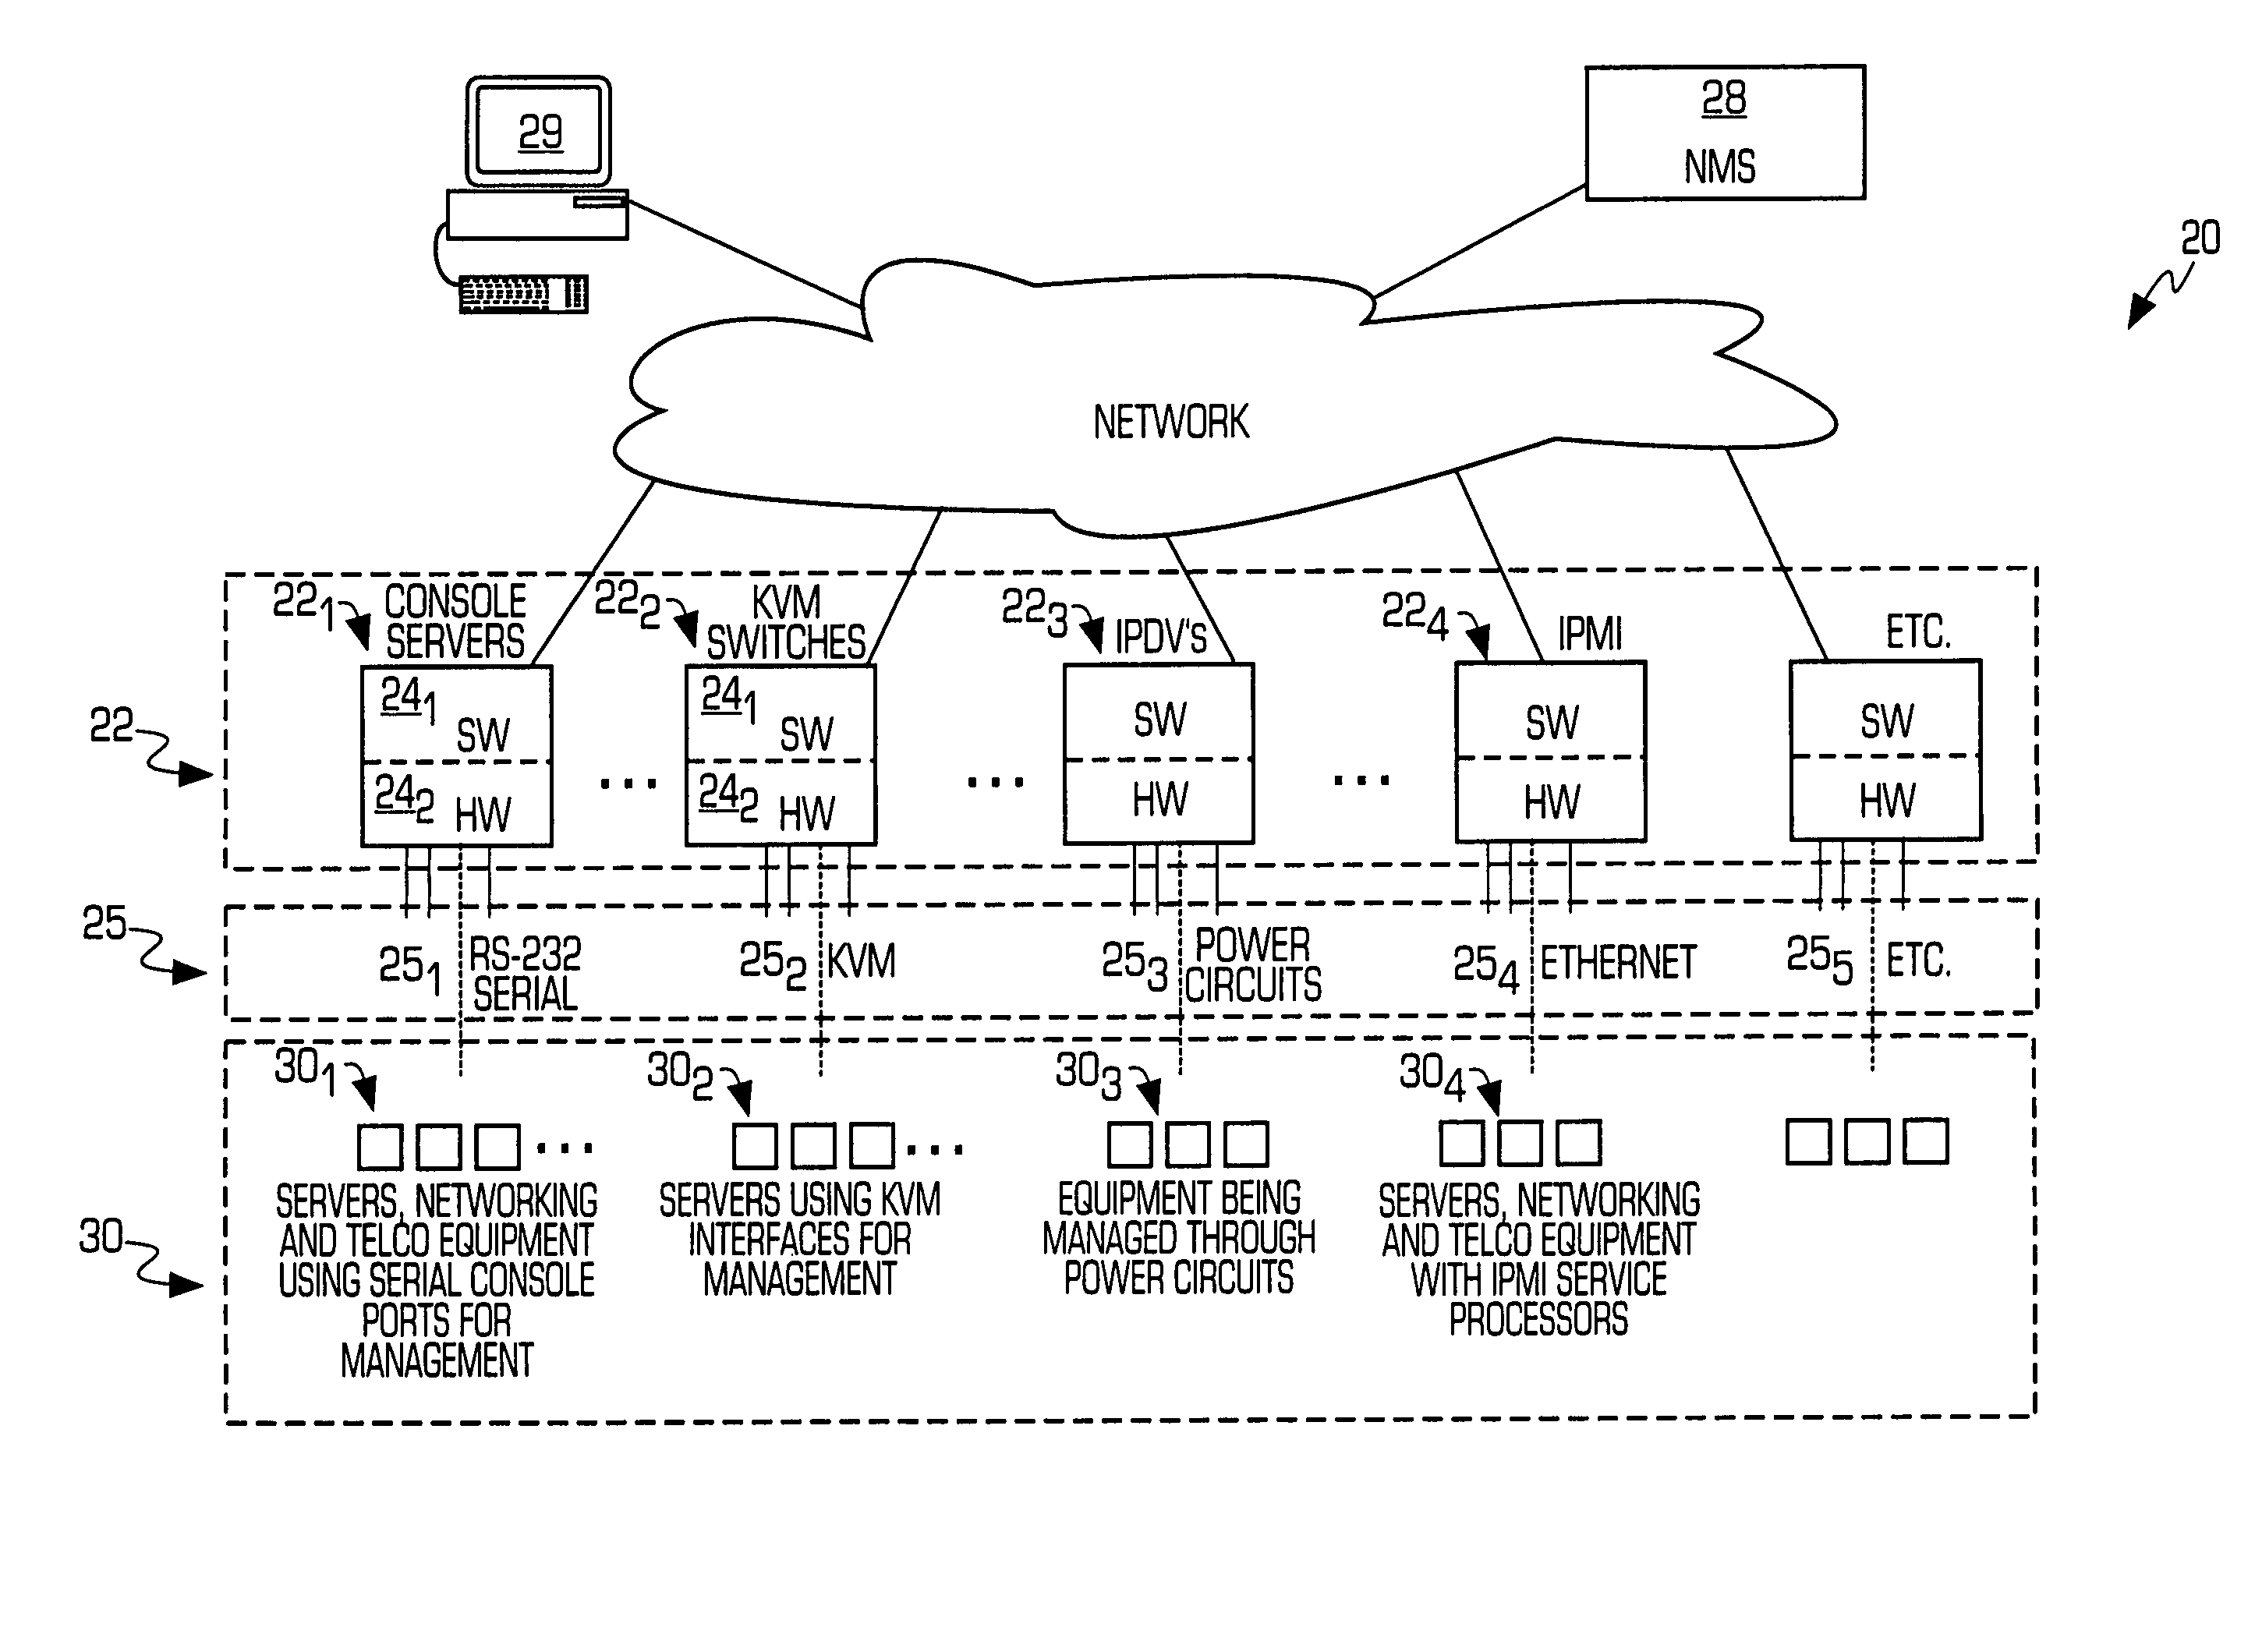 Service processor gateway system and appliance